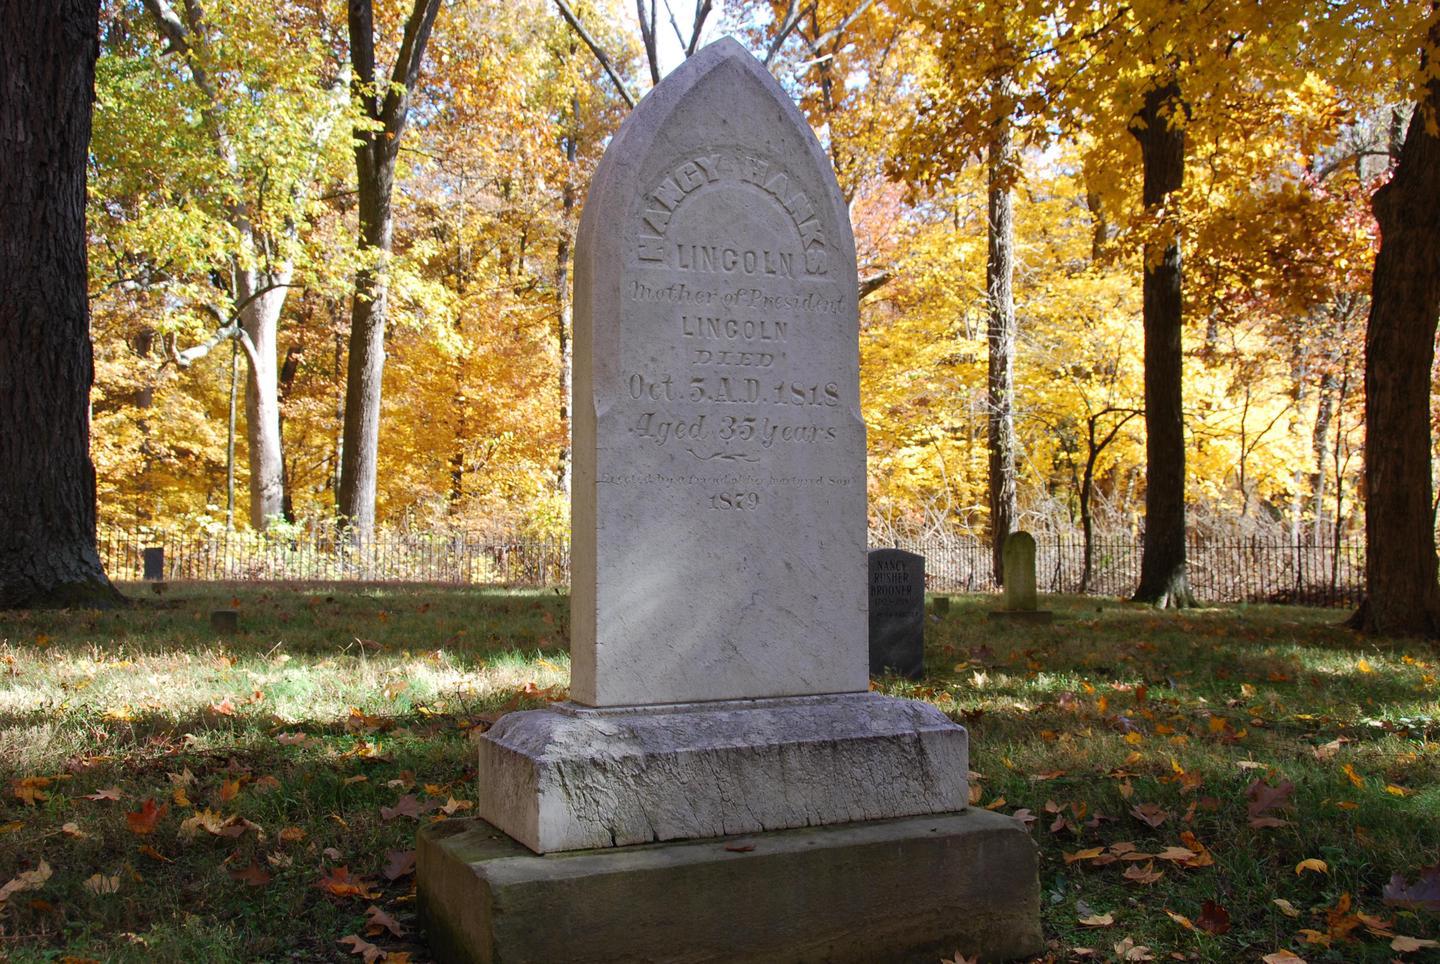 Gravesite of Nancy Hanks LincolnThe headstone, erected in 1879, marks the burial spot of Abraham Lincoln's mother, who died of milk sickness in 1818.